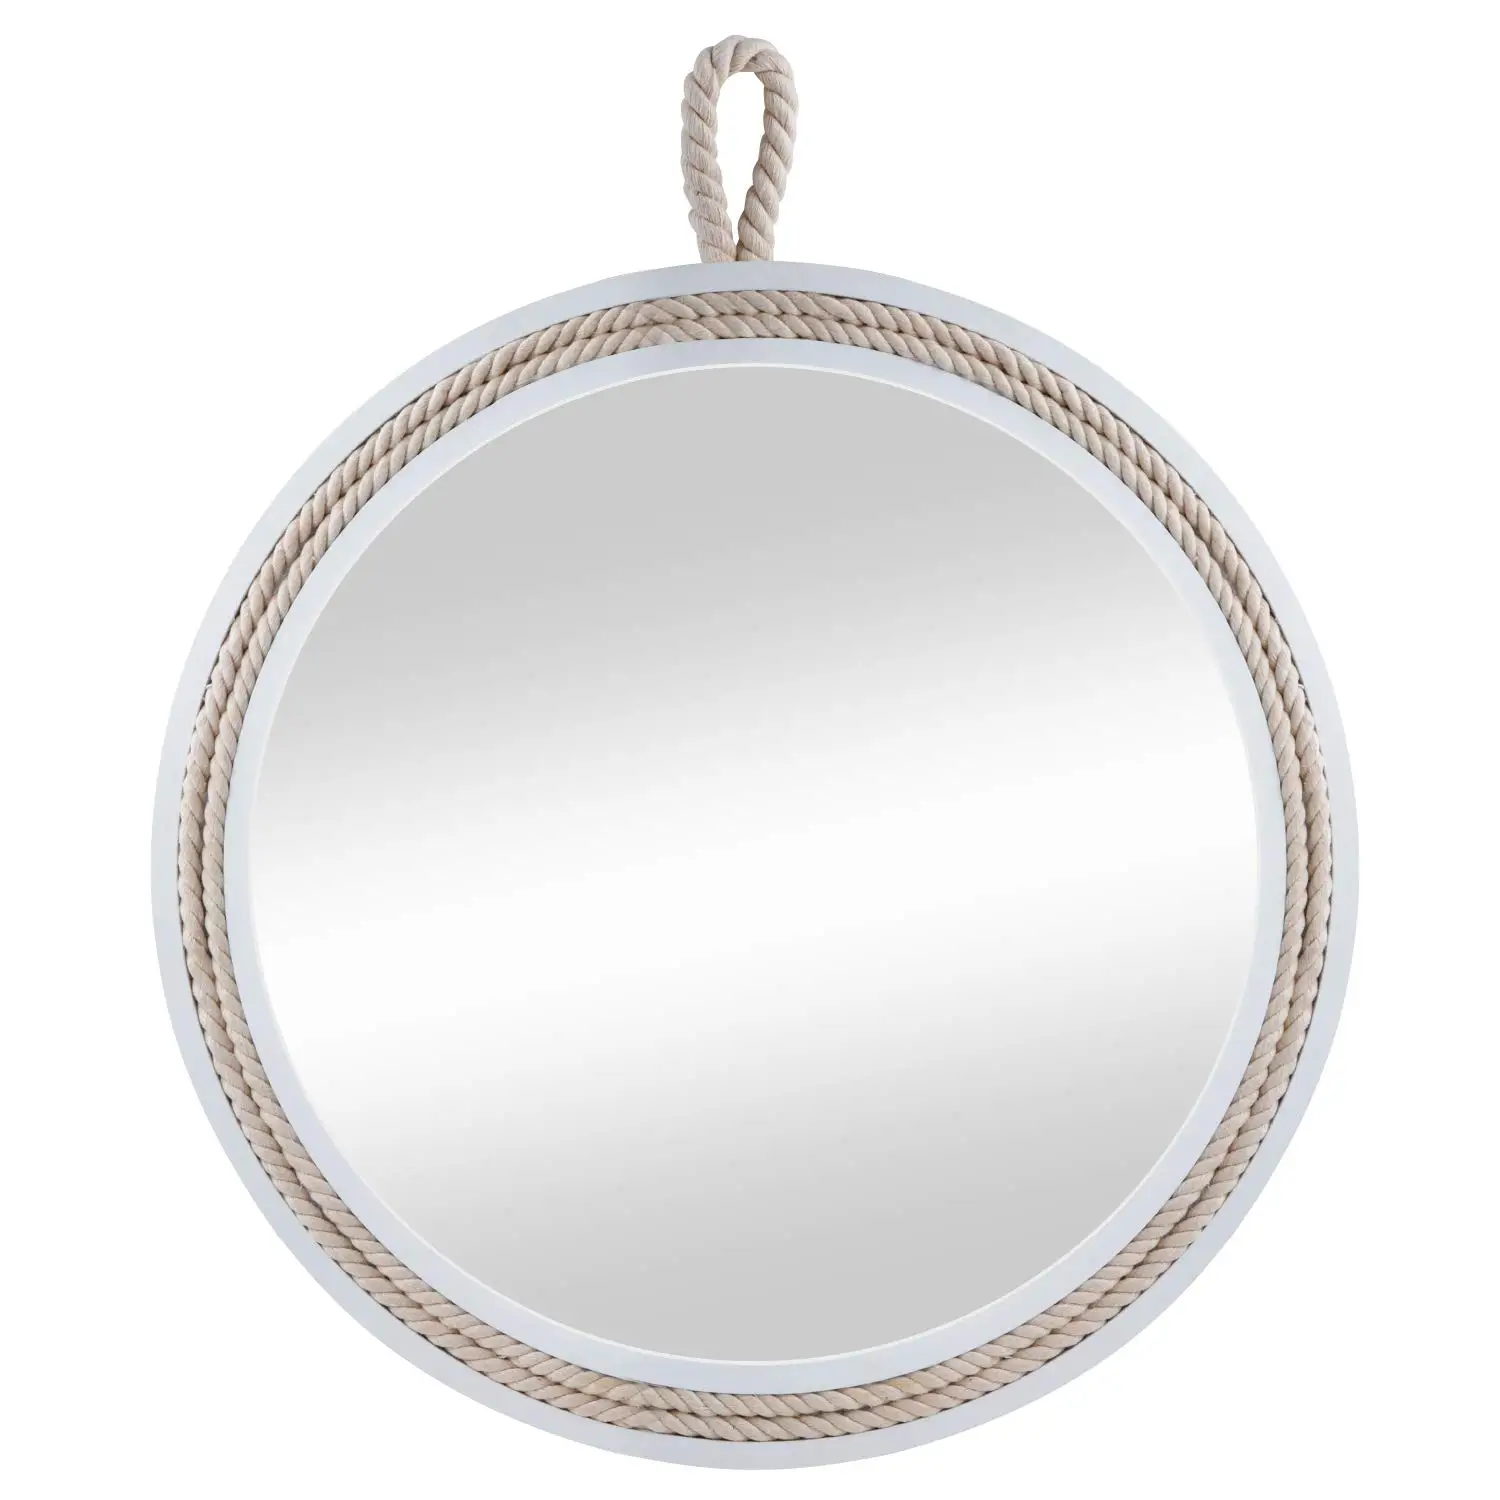 Modern Simplicitydecorative Round Hanging White Wooden Frame Mirror Buy Makeup Mirror Wood Wooden Mirror Decoration Modern Designed Wood Large Mirror Product On Alibaba Com